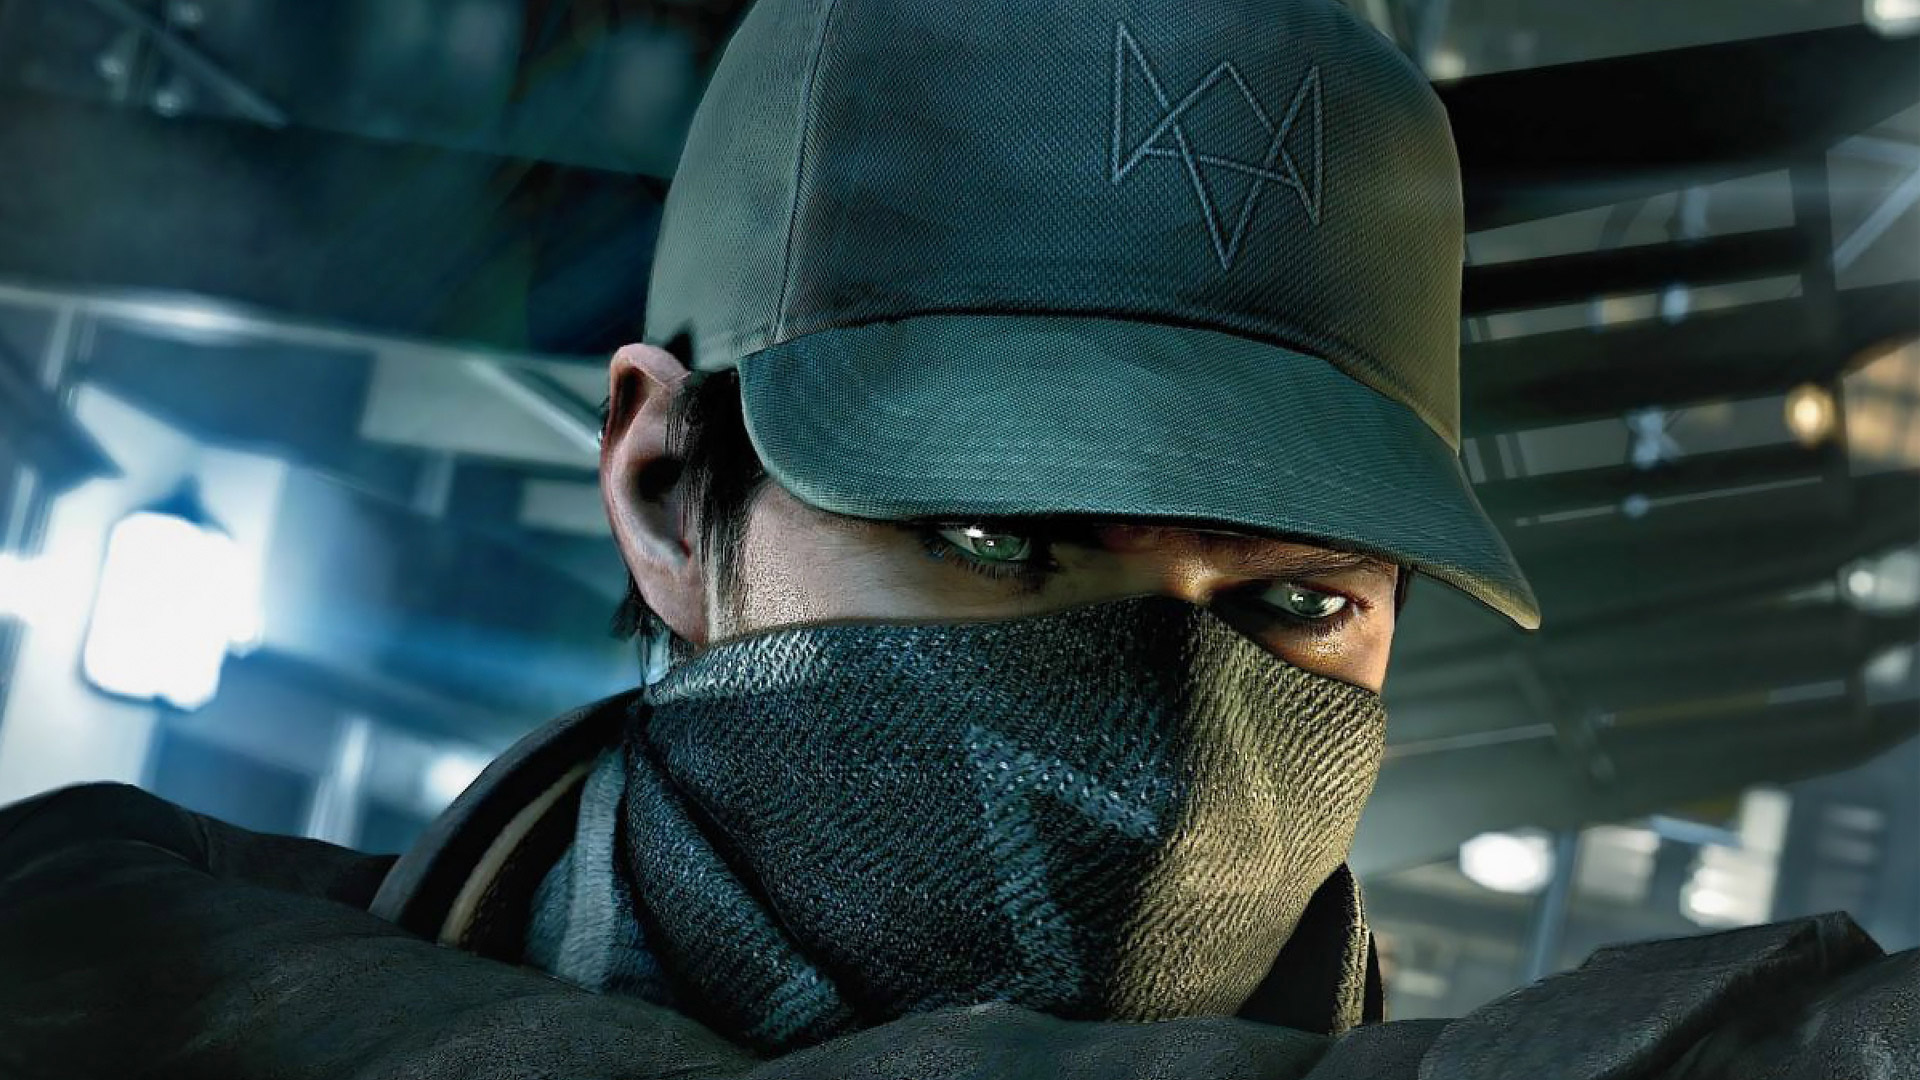 Aiden Pearce HD Wallpaper Background Image Id